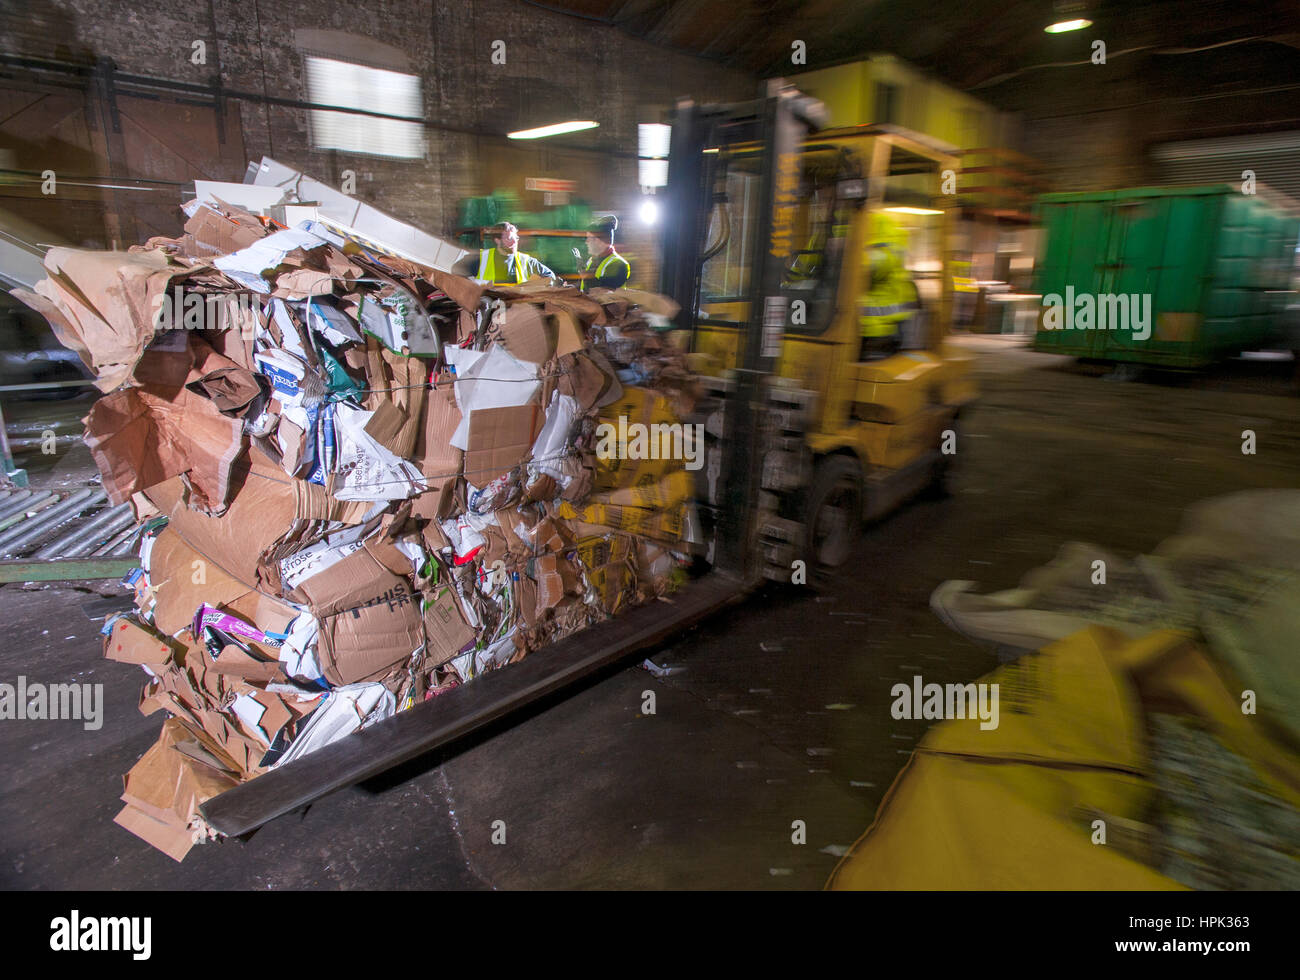 Cardboard and paper bundled for recycling is moved by a forklift at a processing plant Stock Photo